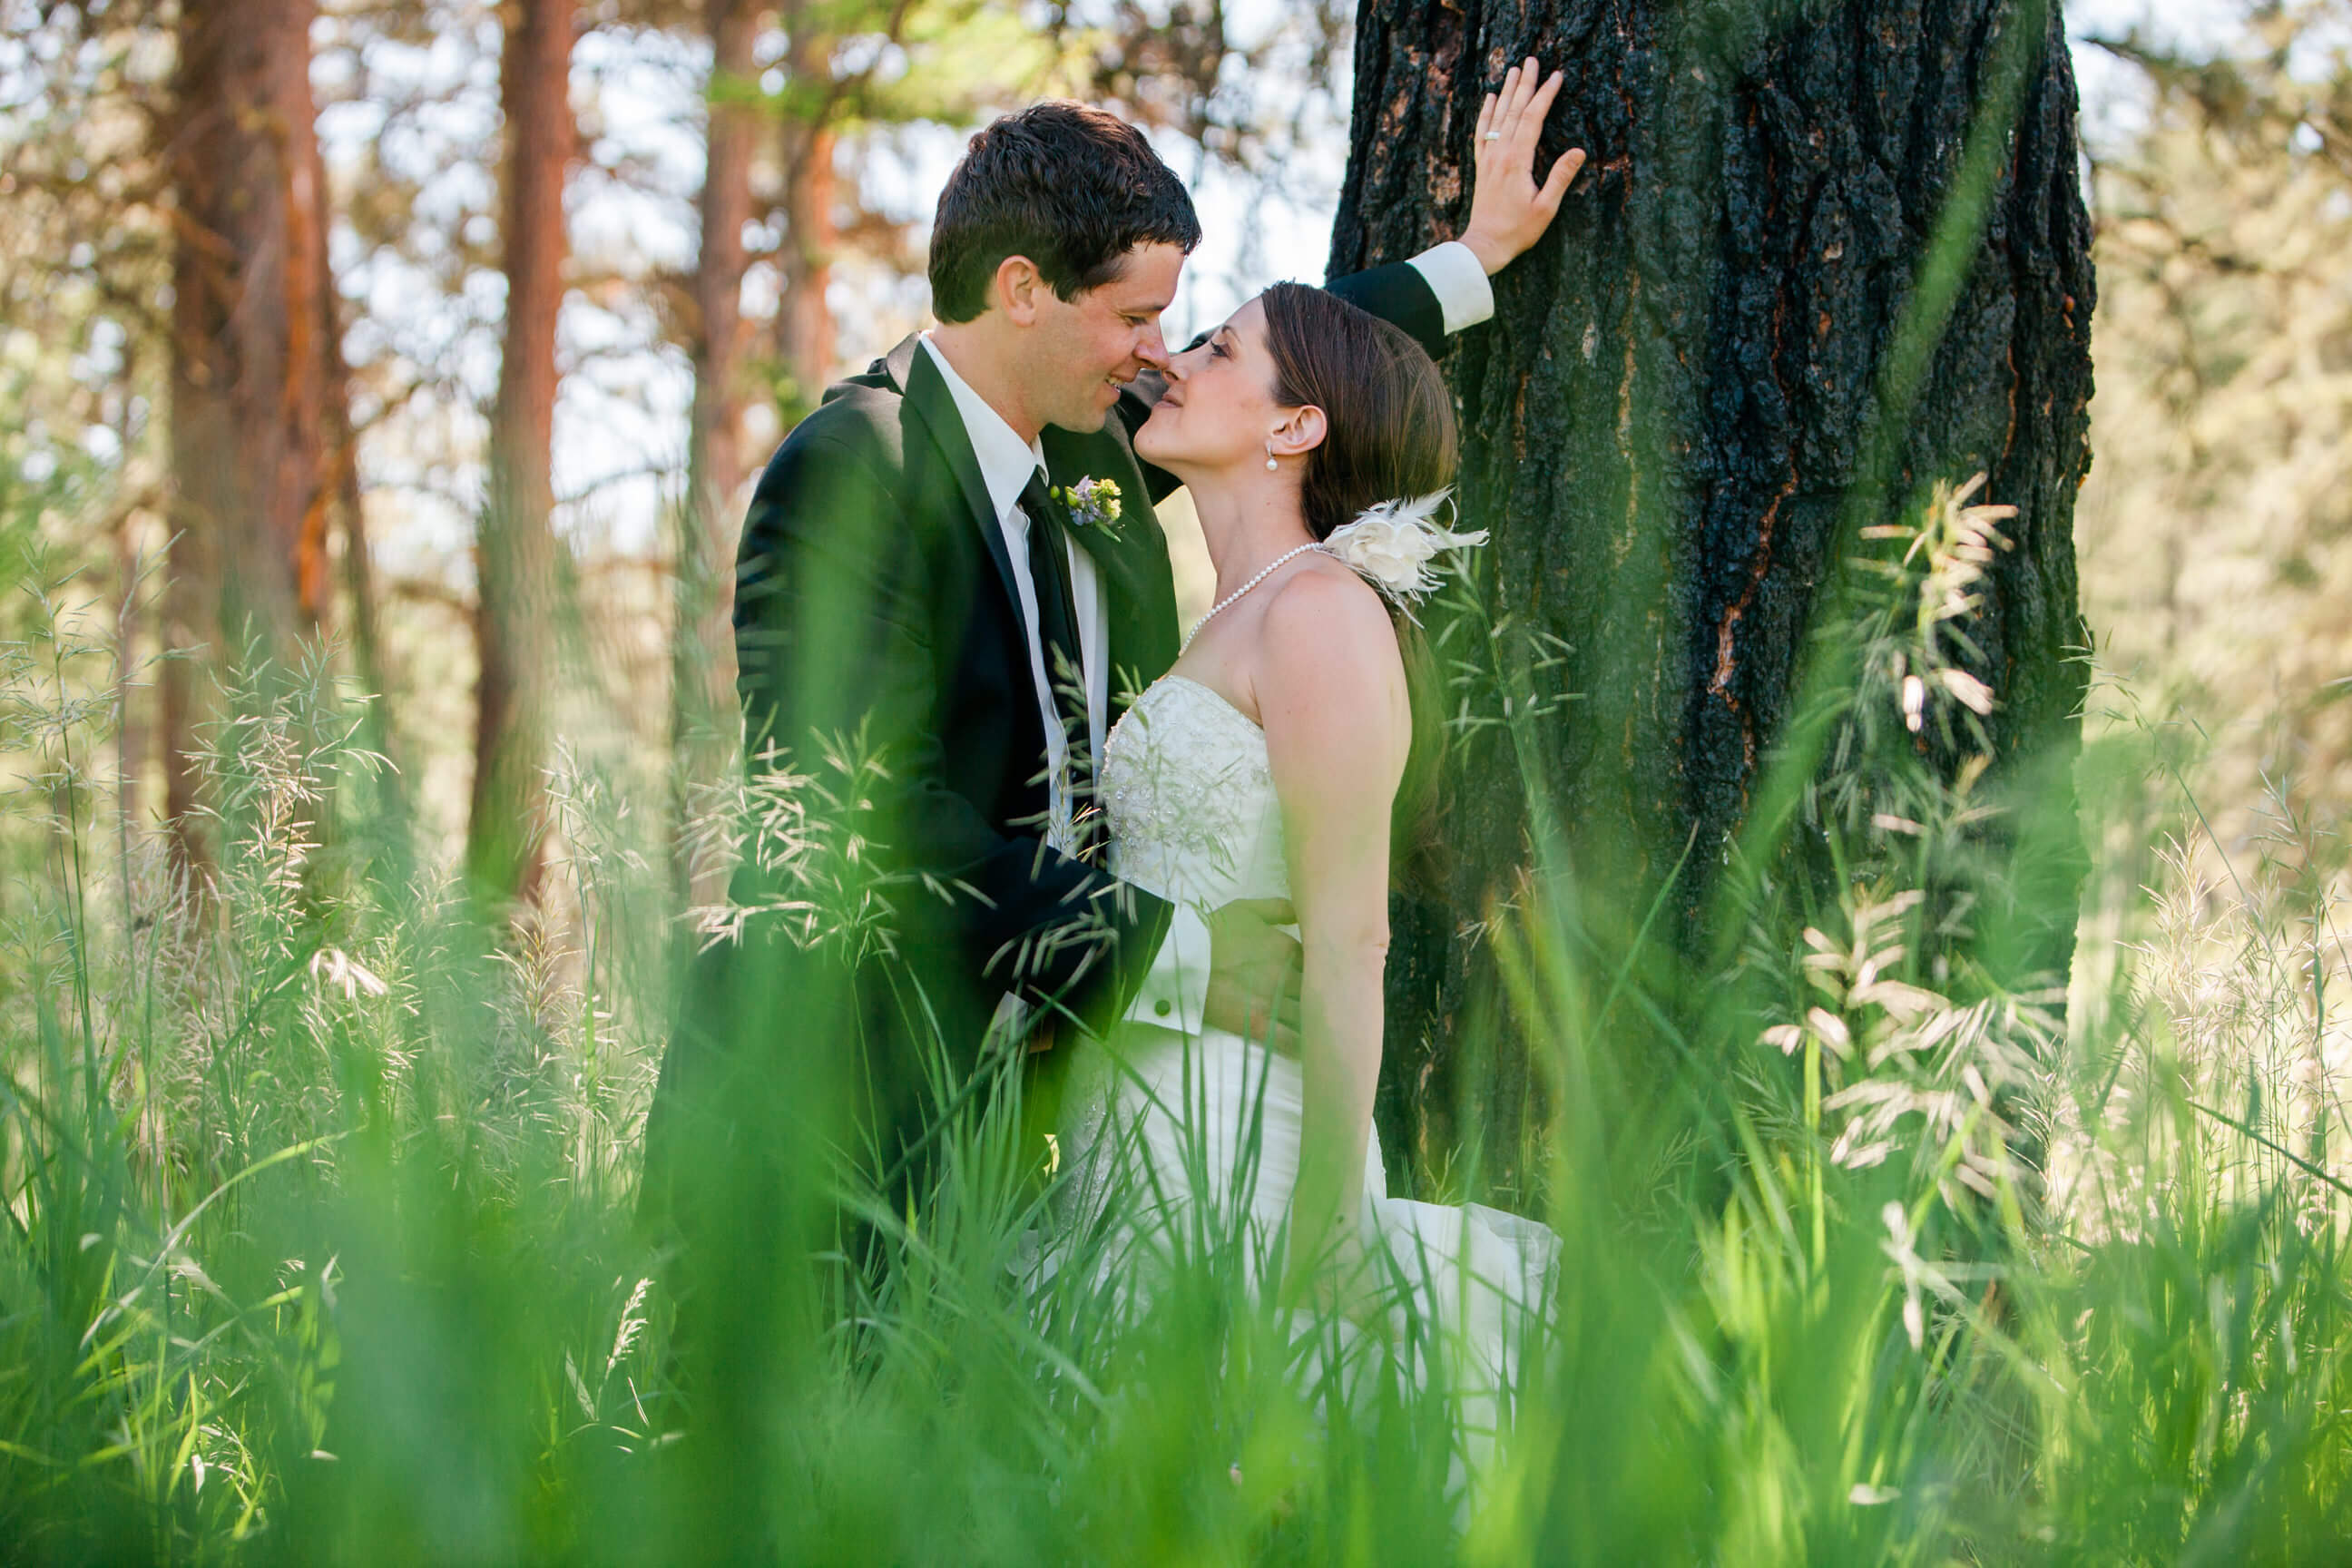 A bride and groom kiss among tall grass in a forest during their rock the dress photos in Missoula Montana